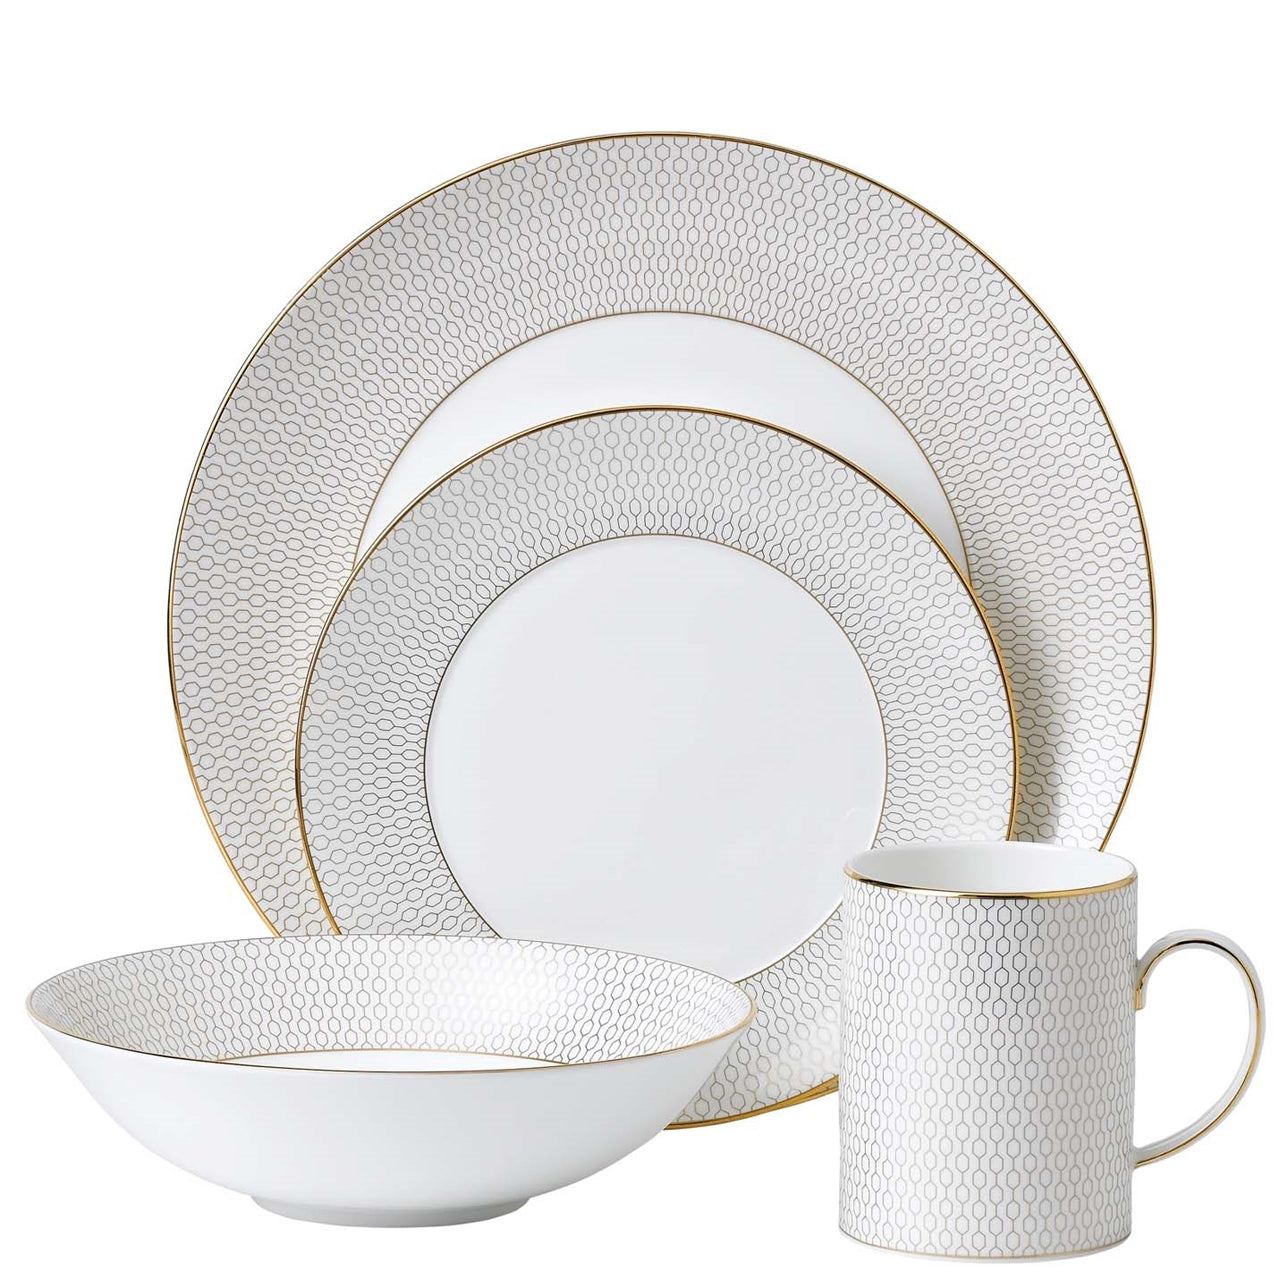 Wedgwood Gio Gold 4 Piece Place Setting